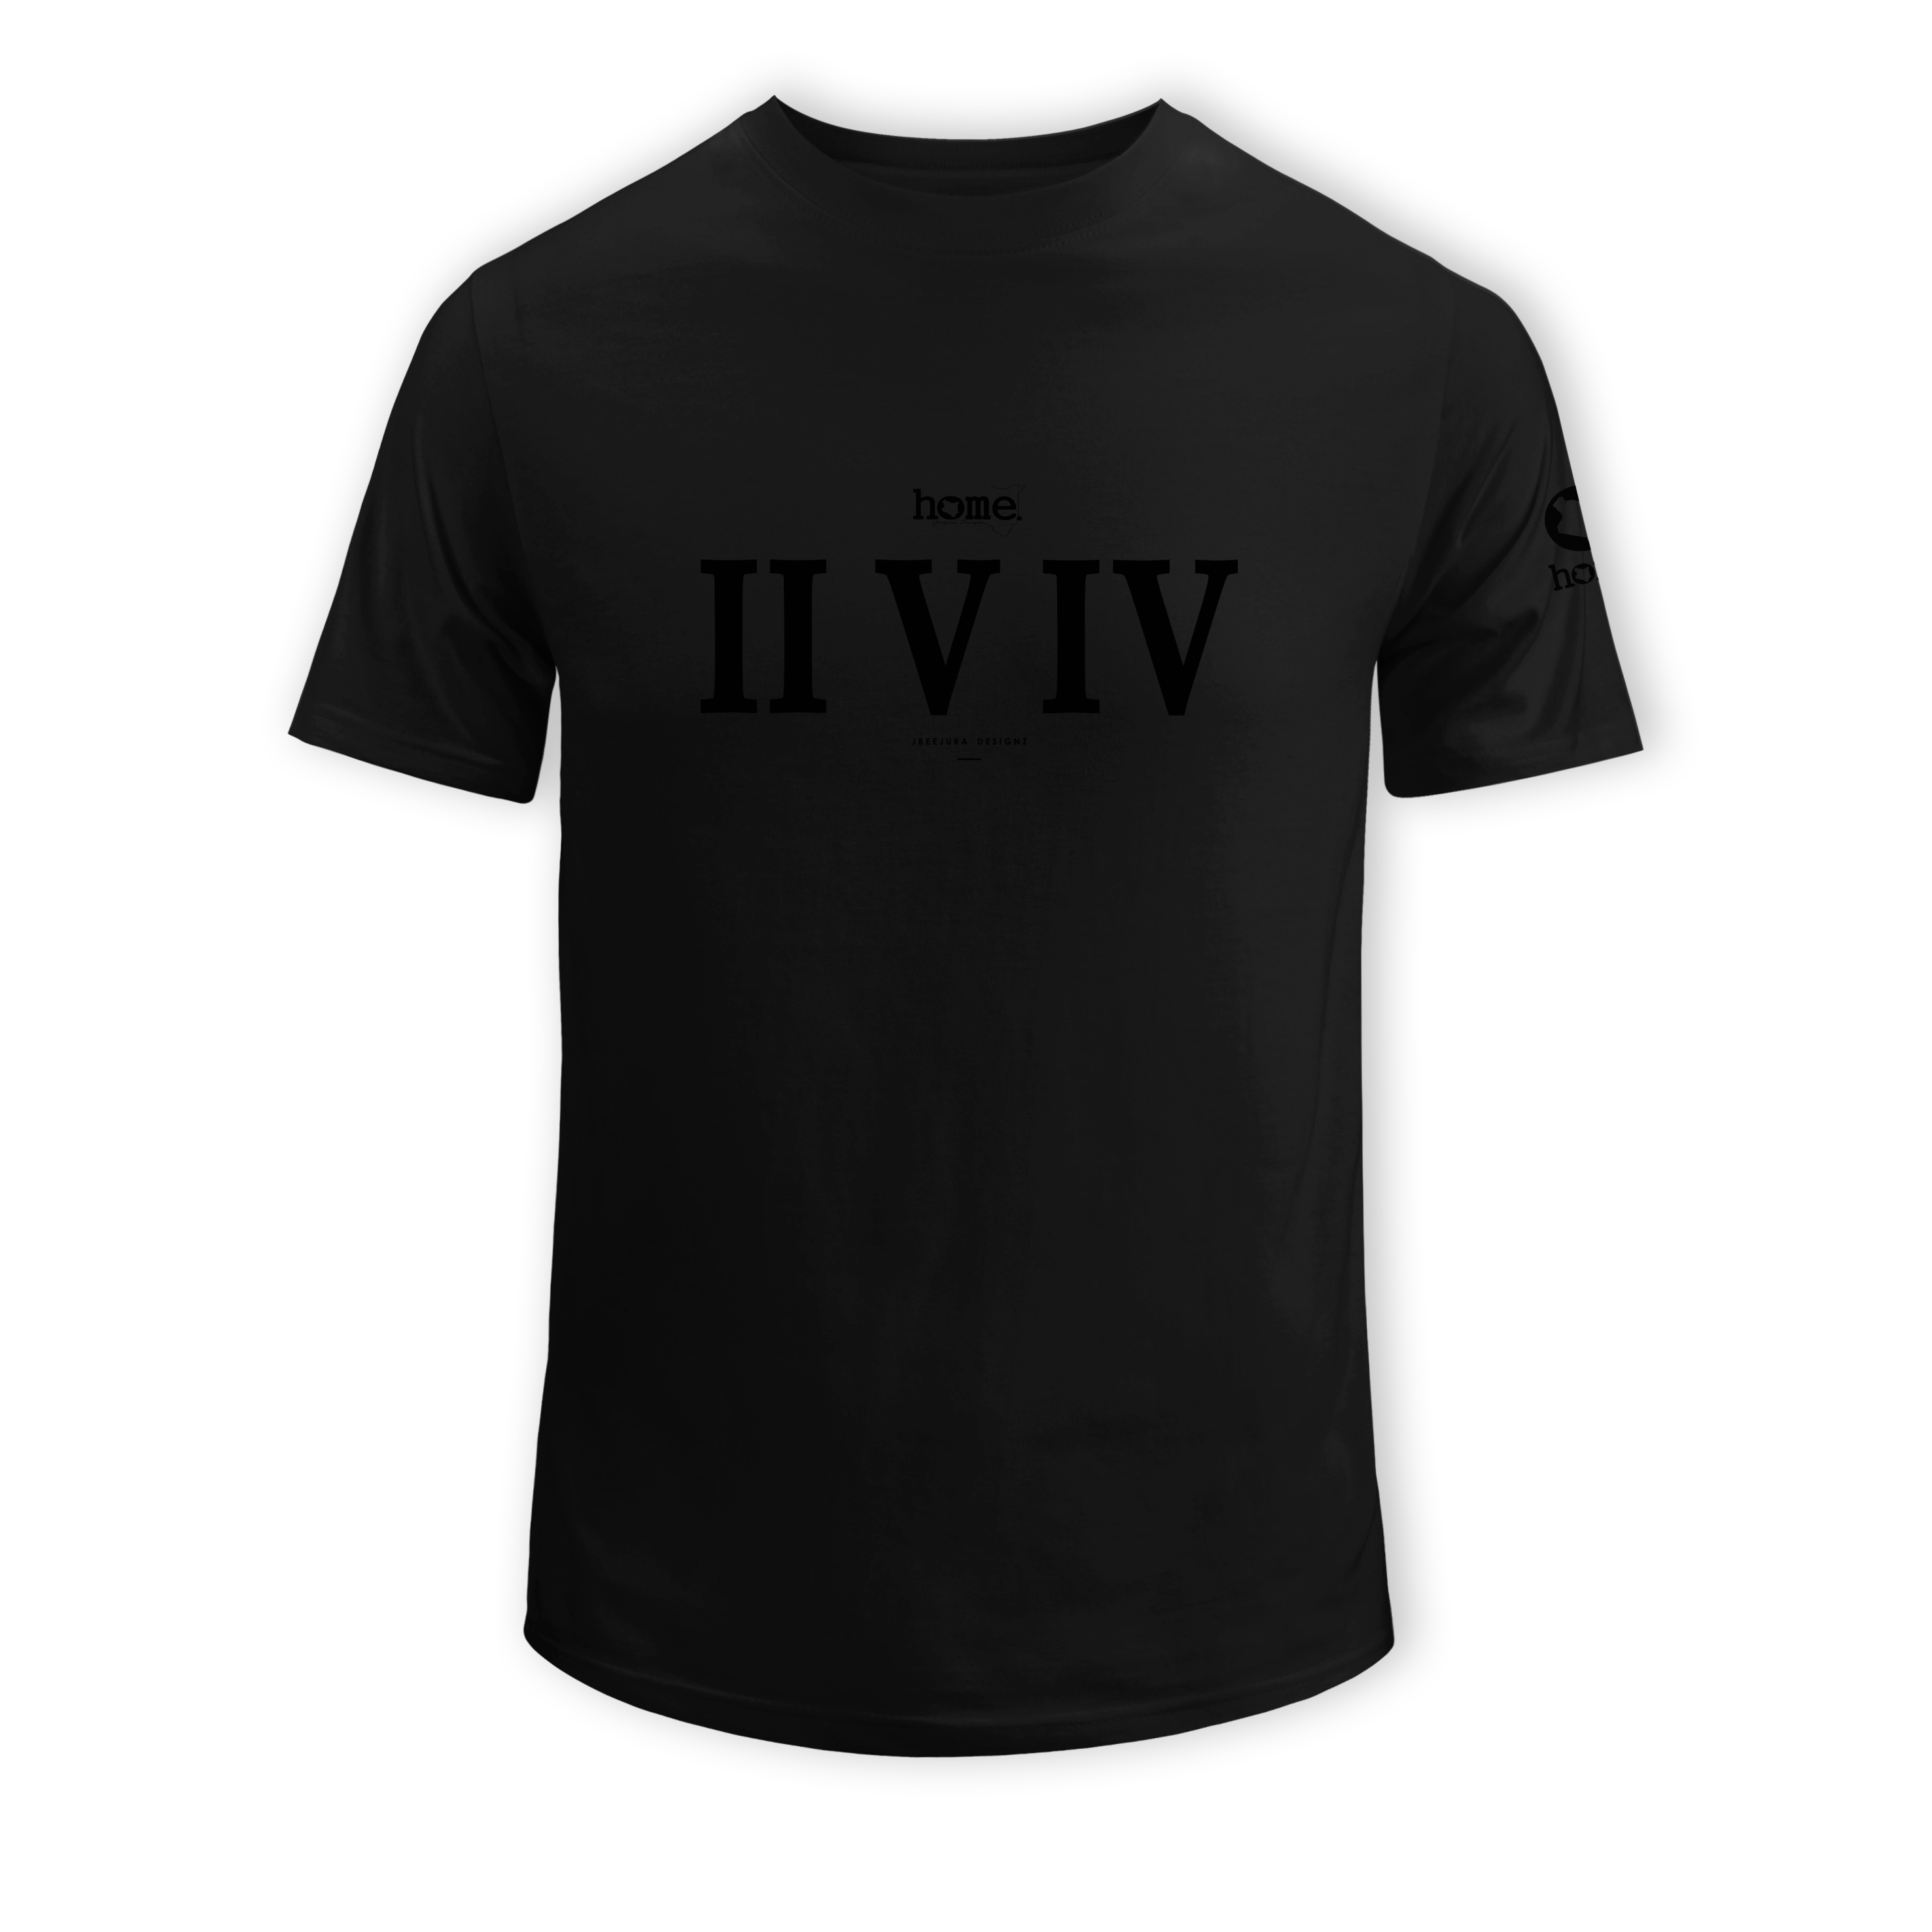 home_254 SHORT-SLEEVED BLACK T-SHIRT WITH A BLACK ROMAN NUMERALS PRINT – COTTON PLUS FABRIC